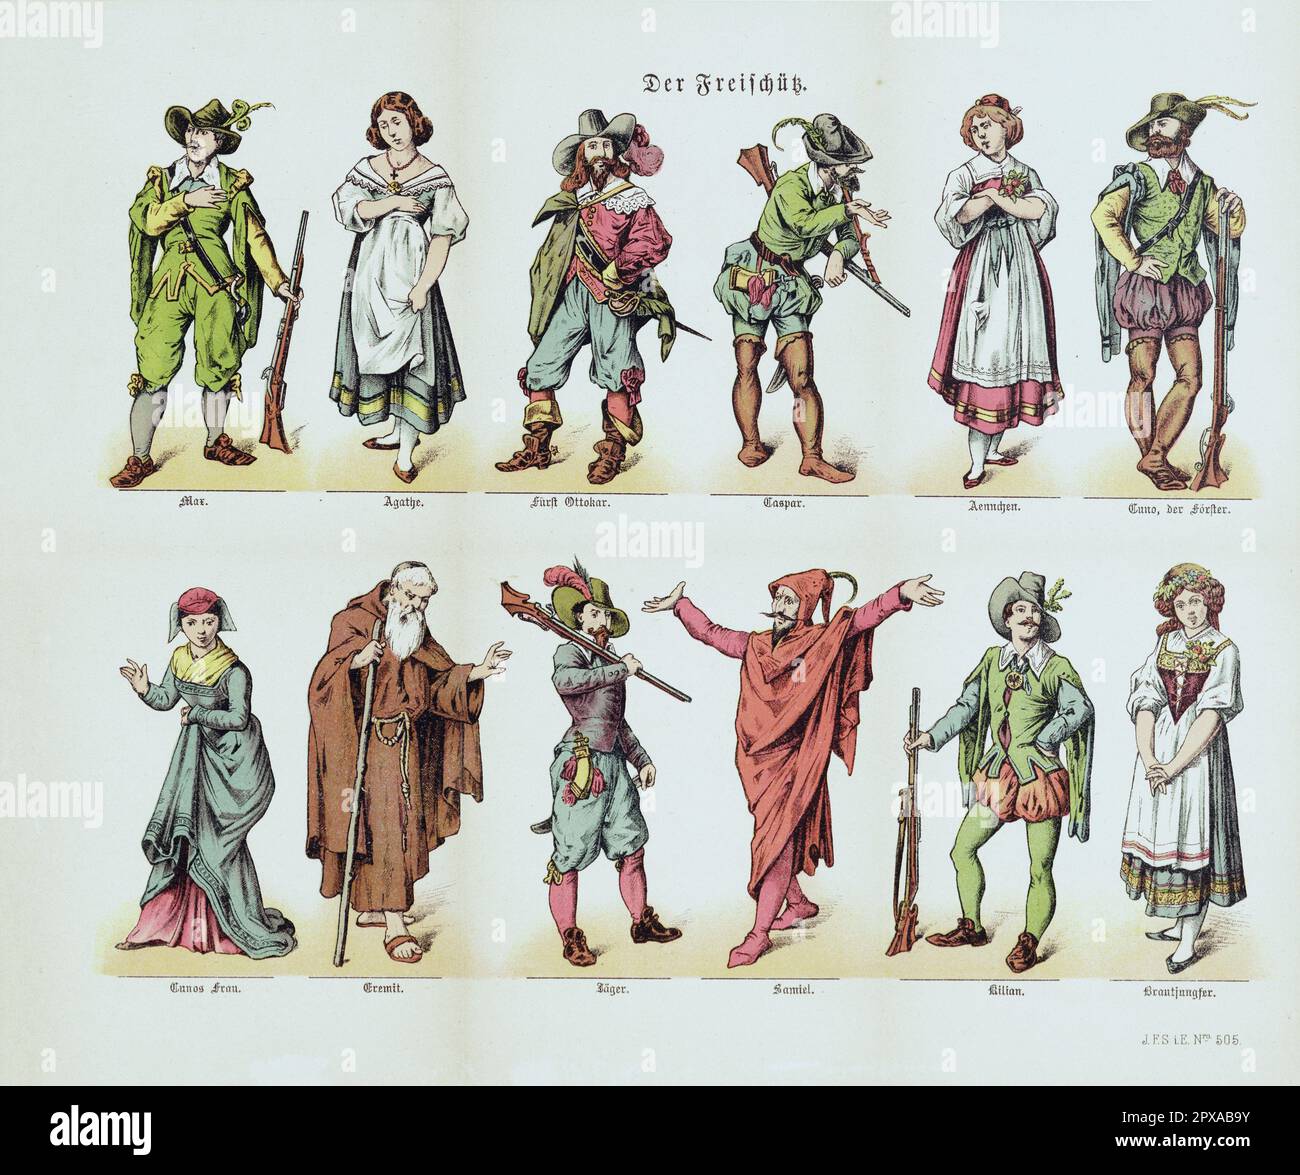 Vintage color illustrations (lithograph) of Der Freischütz (Freeshooter) (German opera based on a story by Johann August Apel and Friedrich Laun). 1881 Der Freischütz (The Marksman or The Freeshooter) is a German opera with spoken dialogue in three acts by Carl Maria von Weber with a libretto by Friedrich Kind, based on a story by Johann August Apel and Friedrich Laun from their 1811 collection Gespensterbuch. Stock Photo